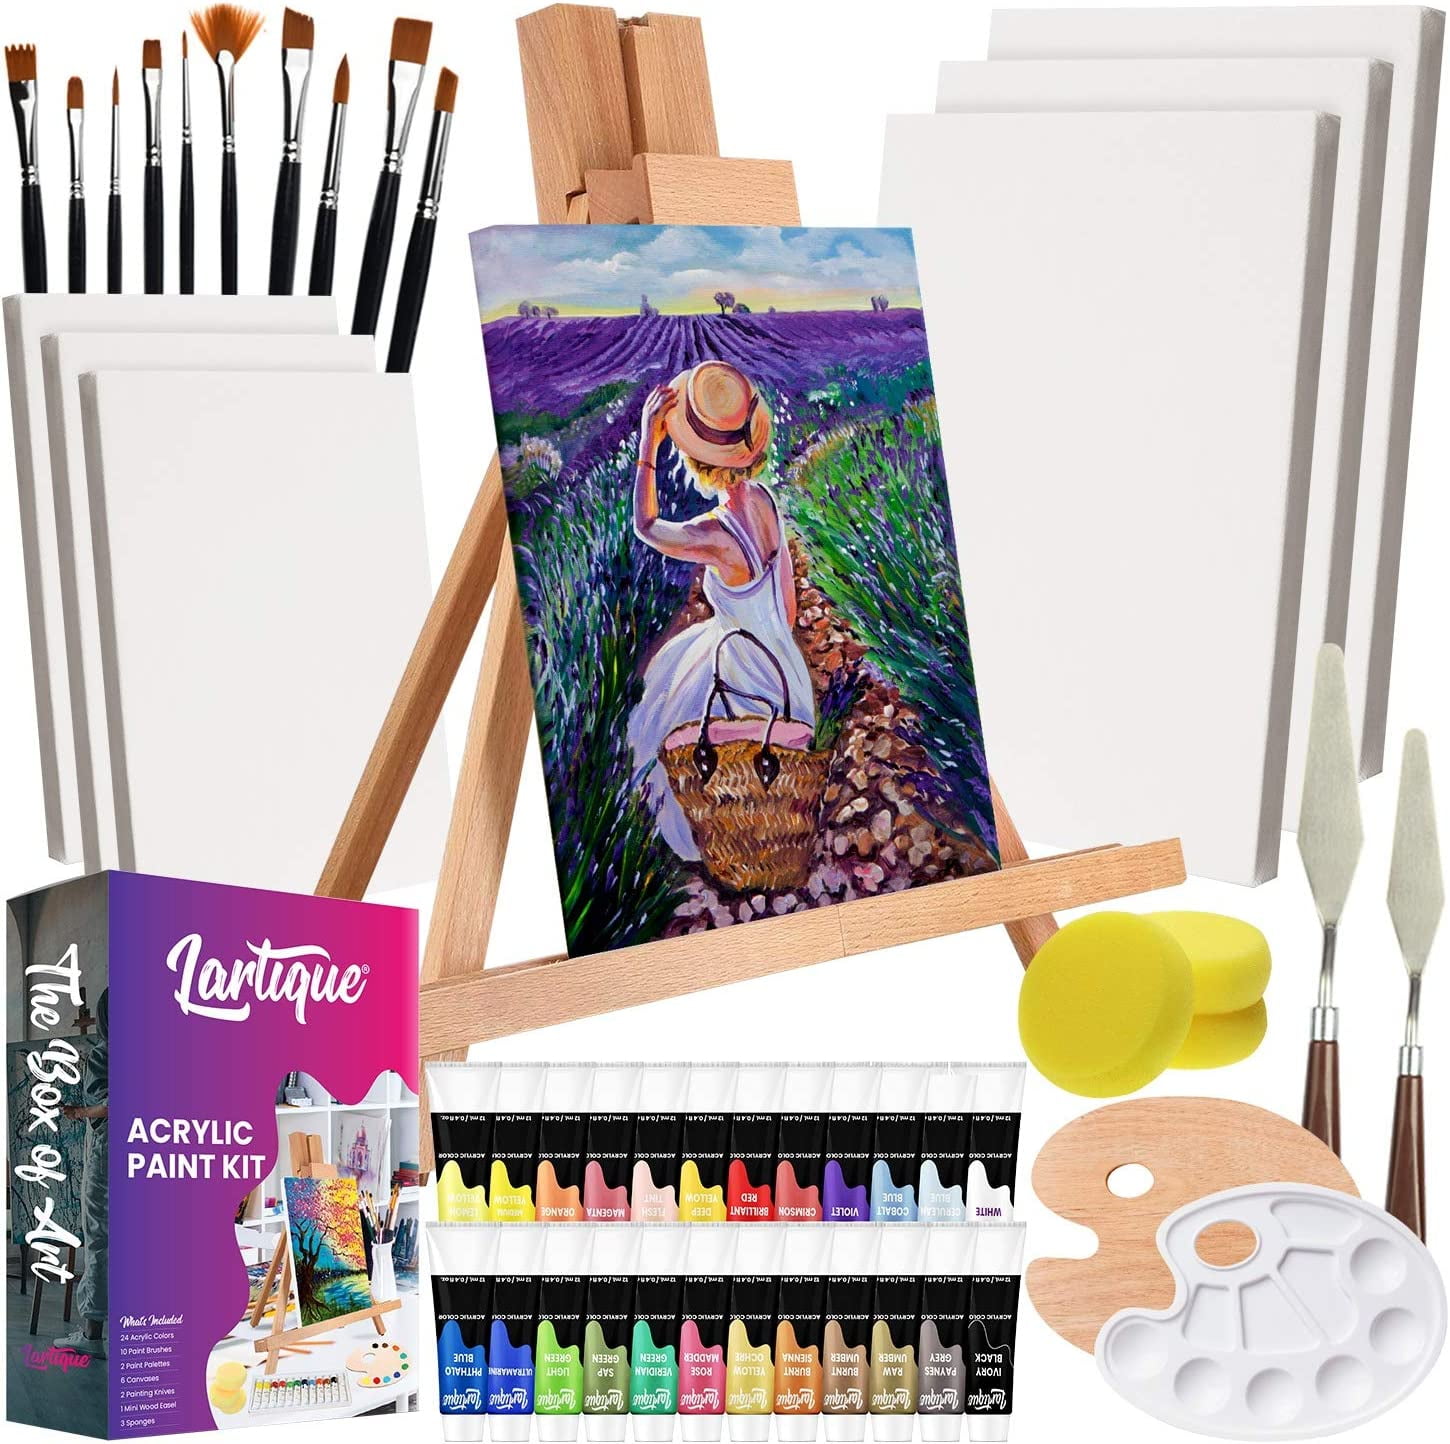 MEEDEN Acrylic Painting Kit 72-Piece Acrylic Paint Set with